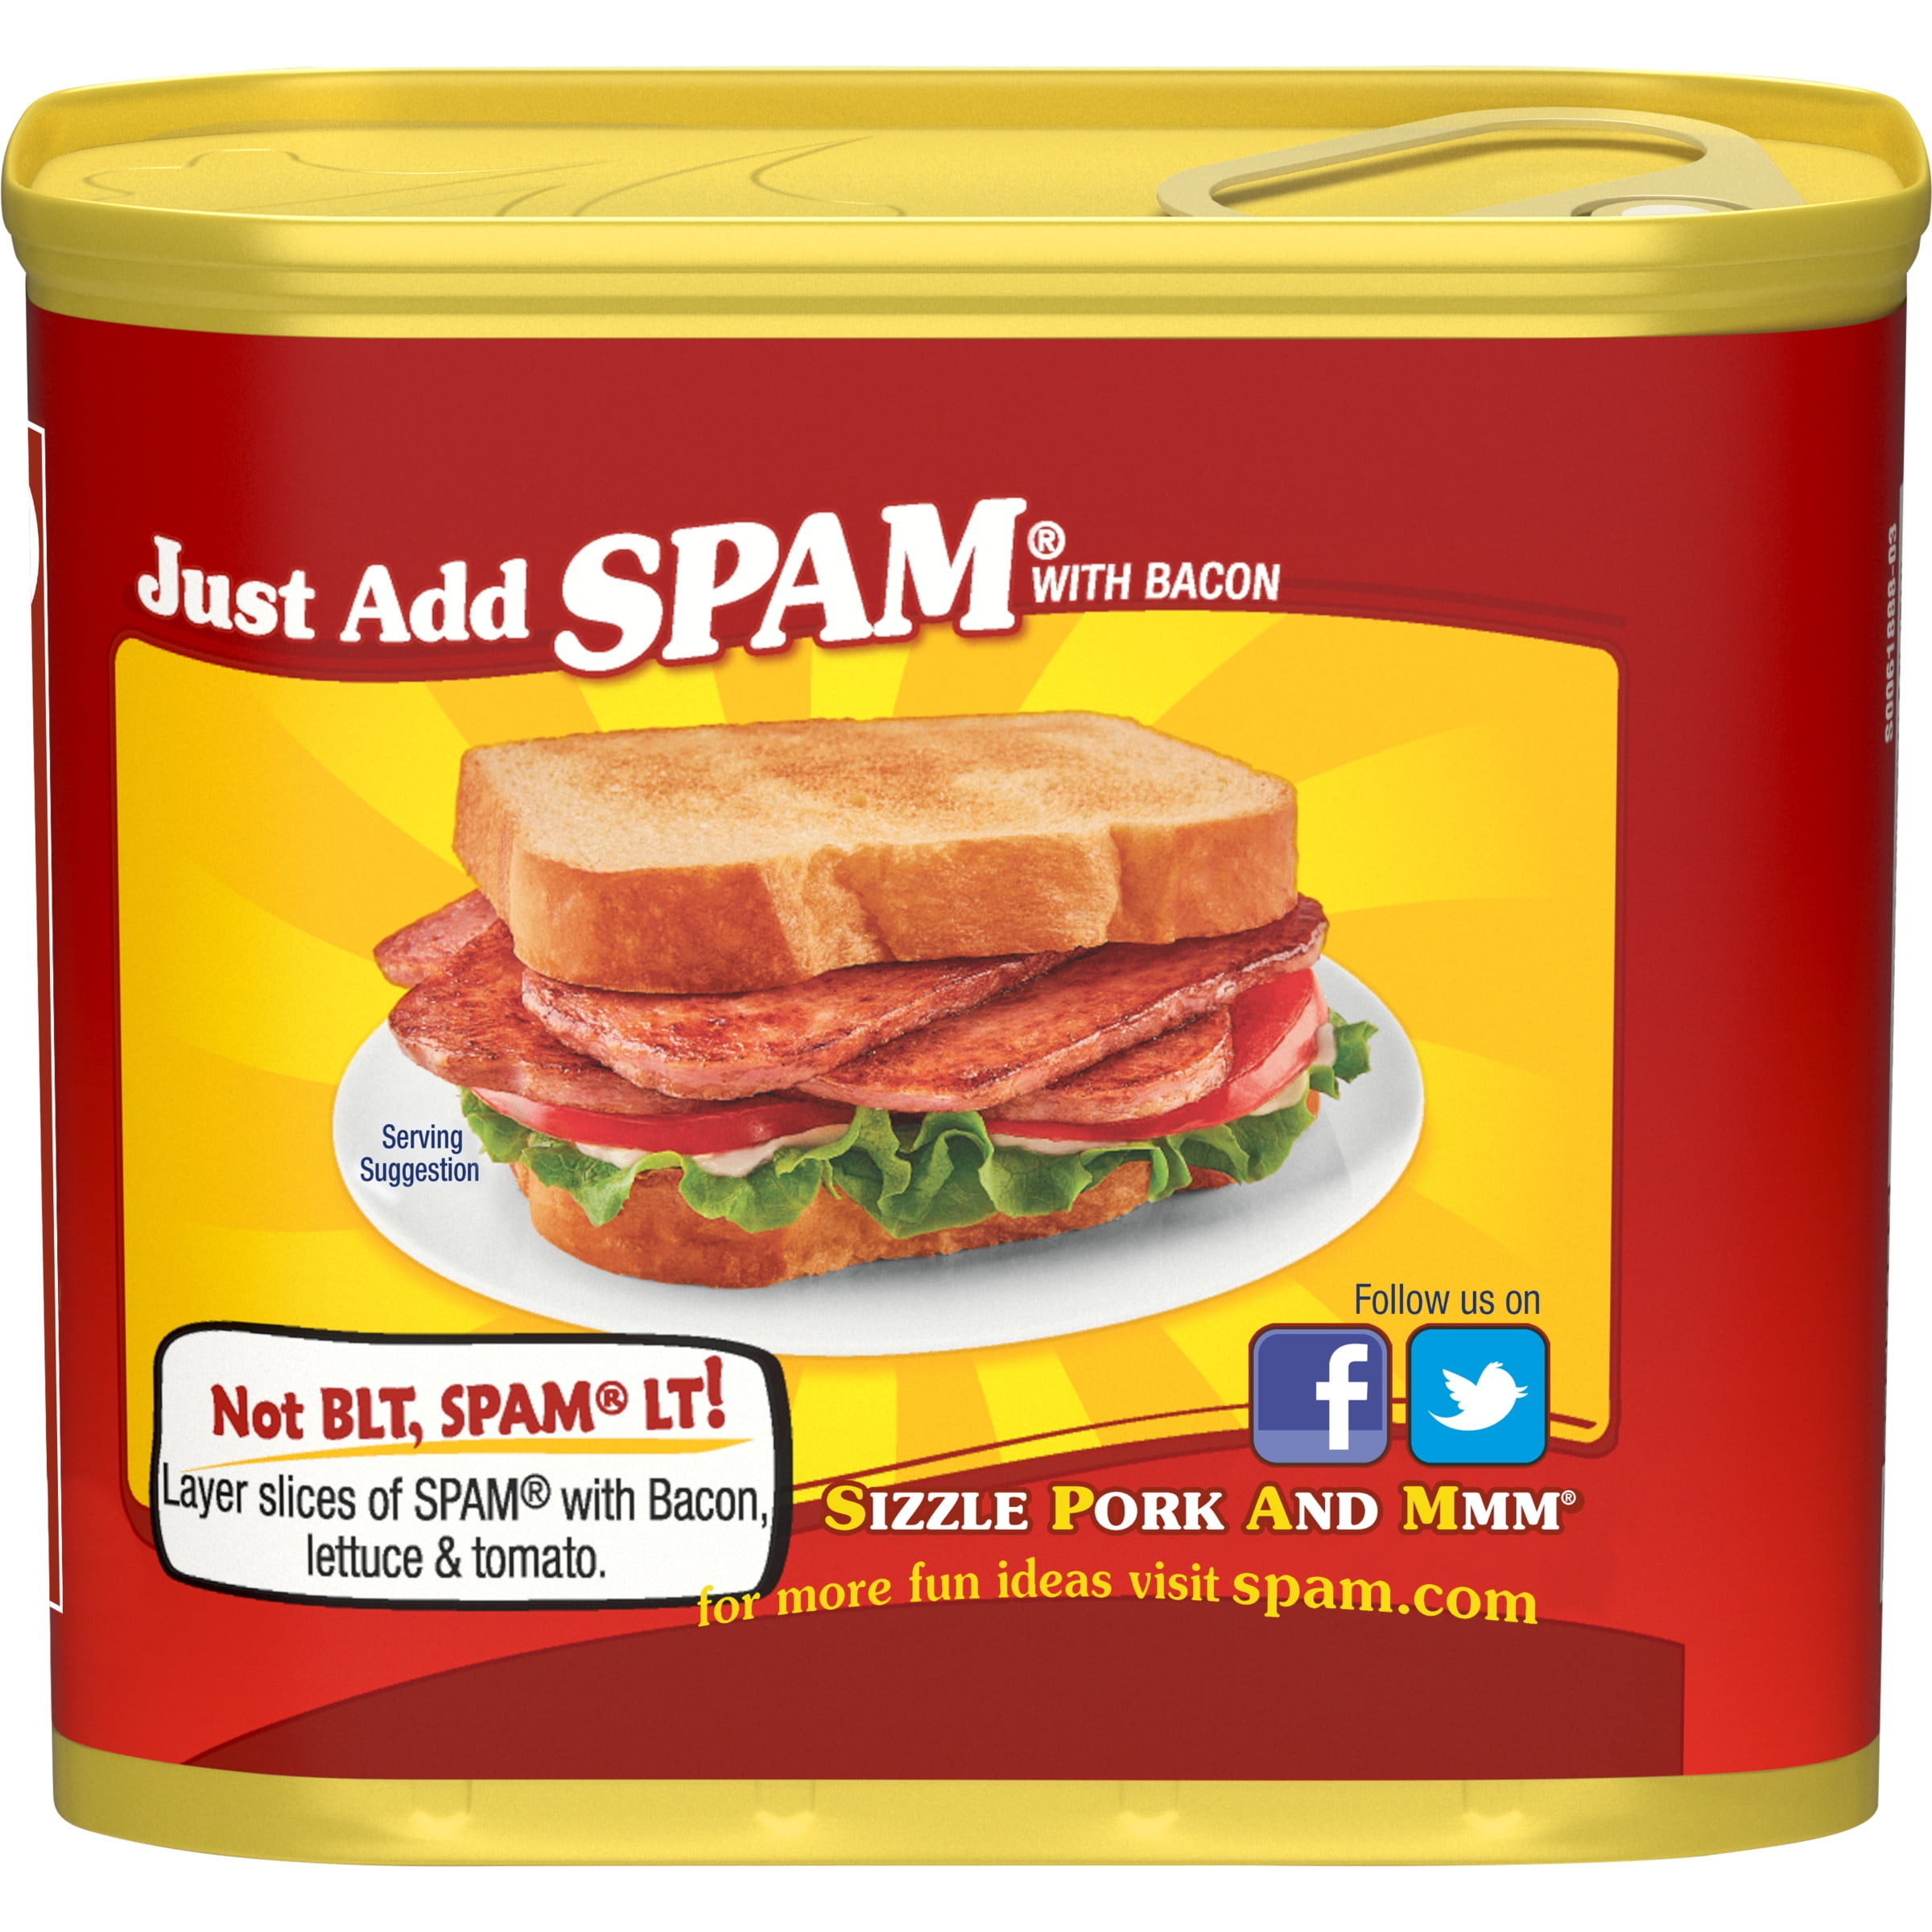 SPAM Canned Meat 3 Teriyaki, 3 Hickory Smoke, 3 Turkey, 3 Bacon (12 cans  total)